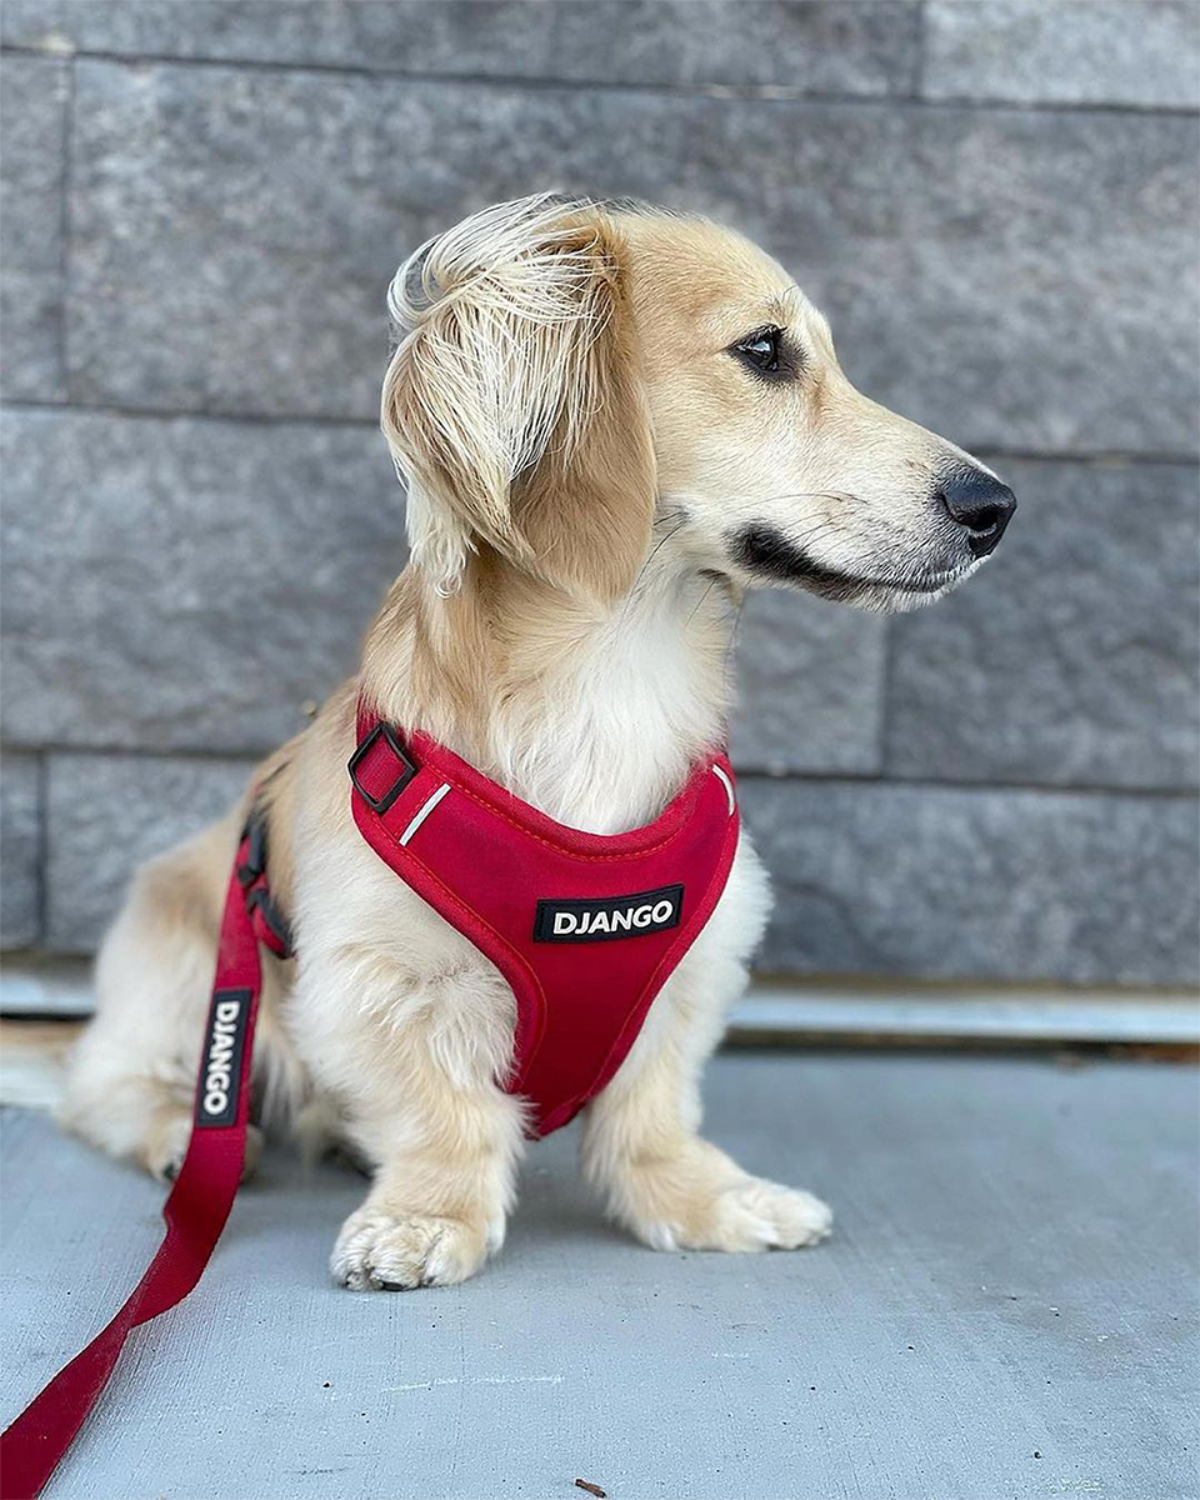 DJANGO's Adventure Dog Harness is a comfortable, lightweight, and padded dog harness featuring adjustable chest and neck straps, reflective piping for low light outings, and dual side release buckles for easy on and off. - djangobrand.com